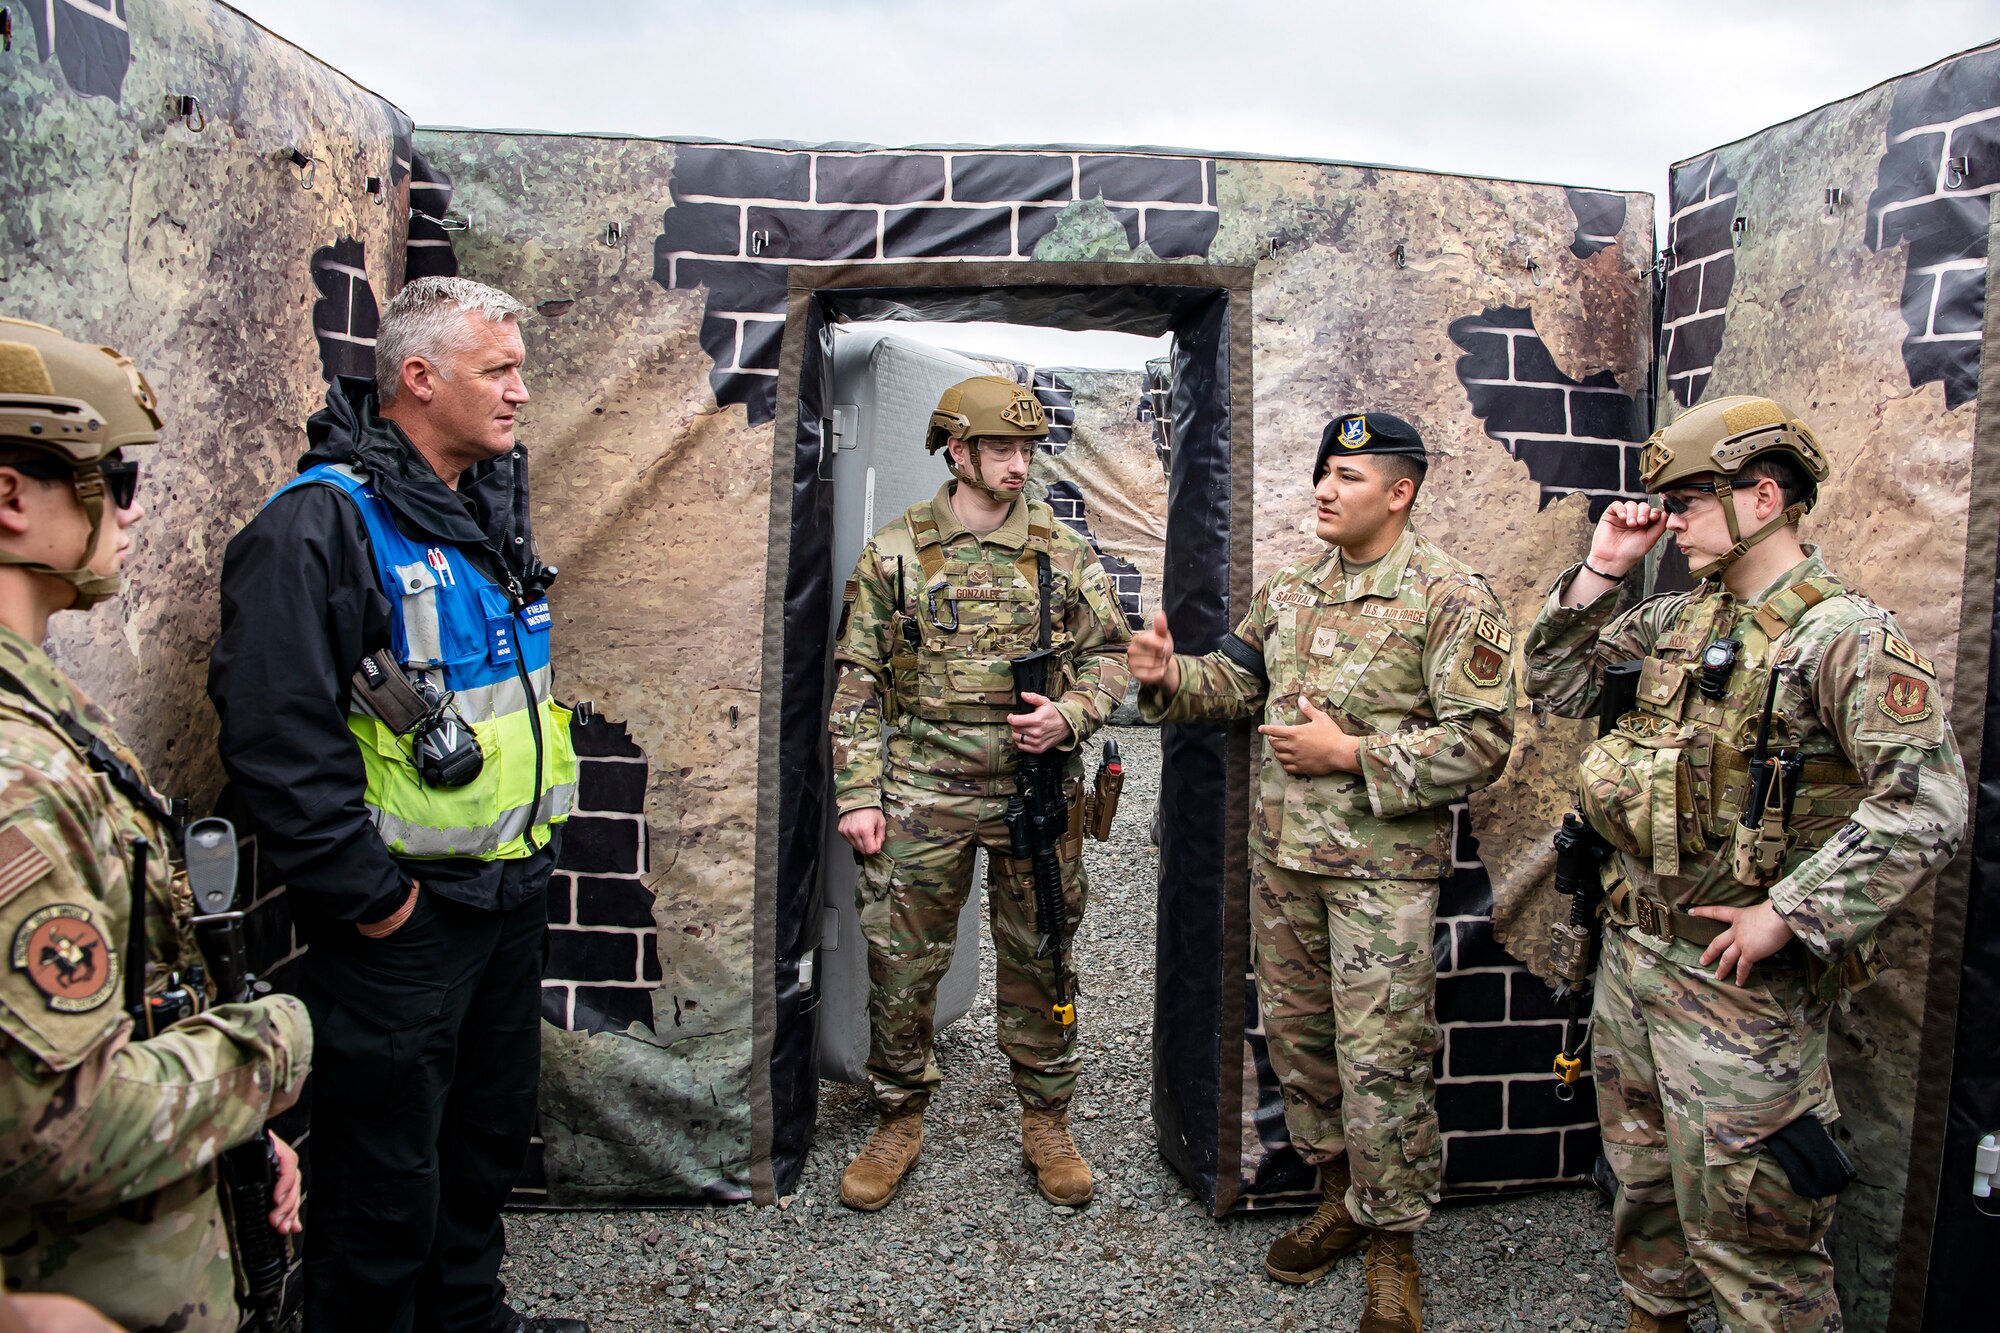 Staff Sgt. Carlos Sandoval, center right, 422nd Security Forces Squadron unit trainer, speaks with John Hogg, center left, Northamptonshire Police Department firearms instructor, following a tri-agency active shooter response exercise at RAF Croughton, England, June 30, 2021. Airmen from the 422nd SFS along with police officers from the NHPD and Ministry of Defense, participated in multiple exercises to enhance their search and seizure tactics, strengthen local ties and gain rapport with their fellow officers. (U.S. Air Force photo by Senior Airman Eugene Oliver)